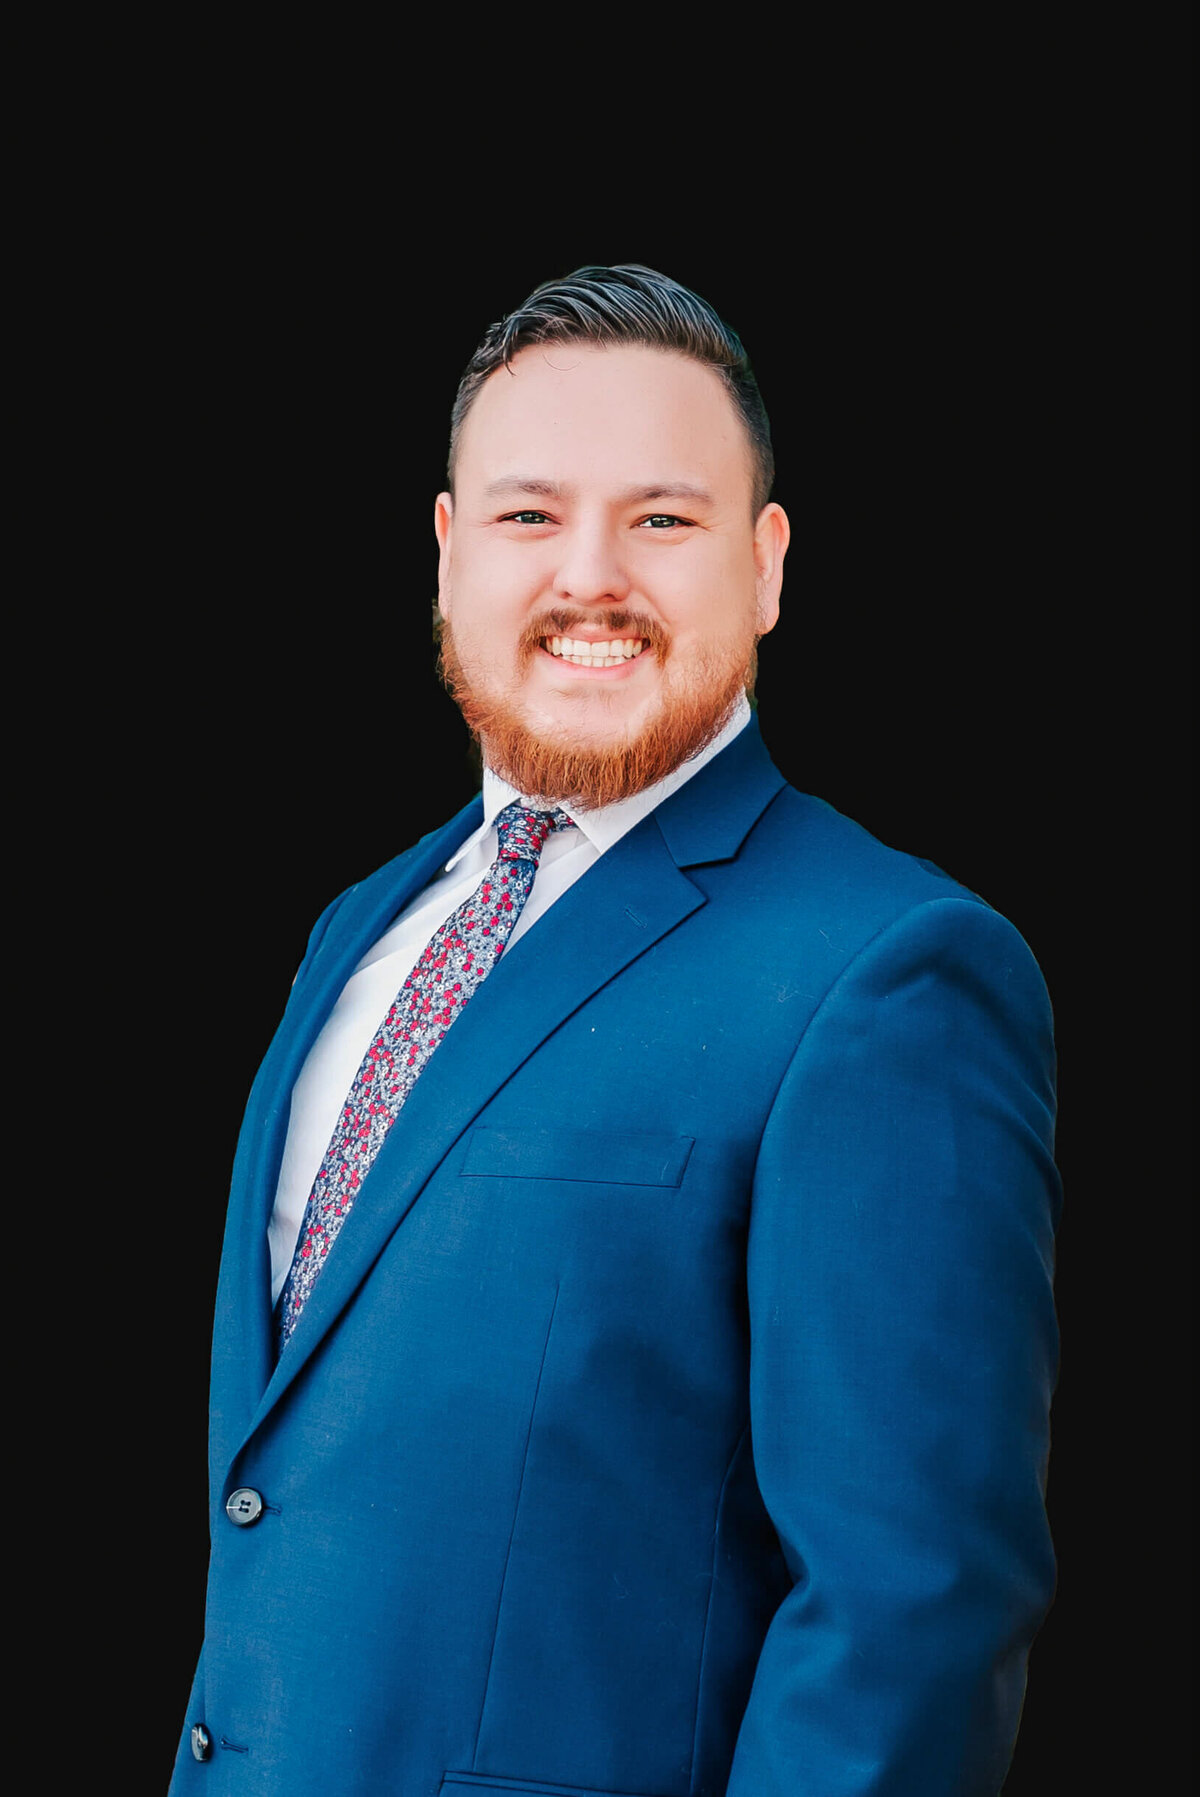 professional headshot pictures in Springfield MO` of hea man smiling in blue suit